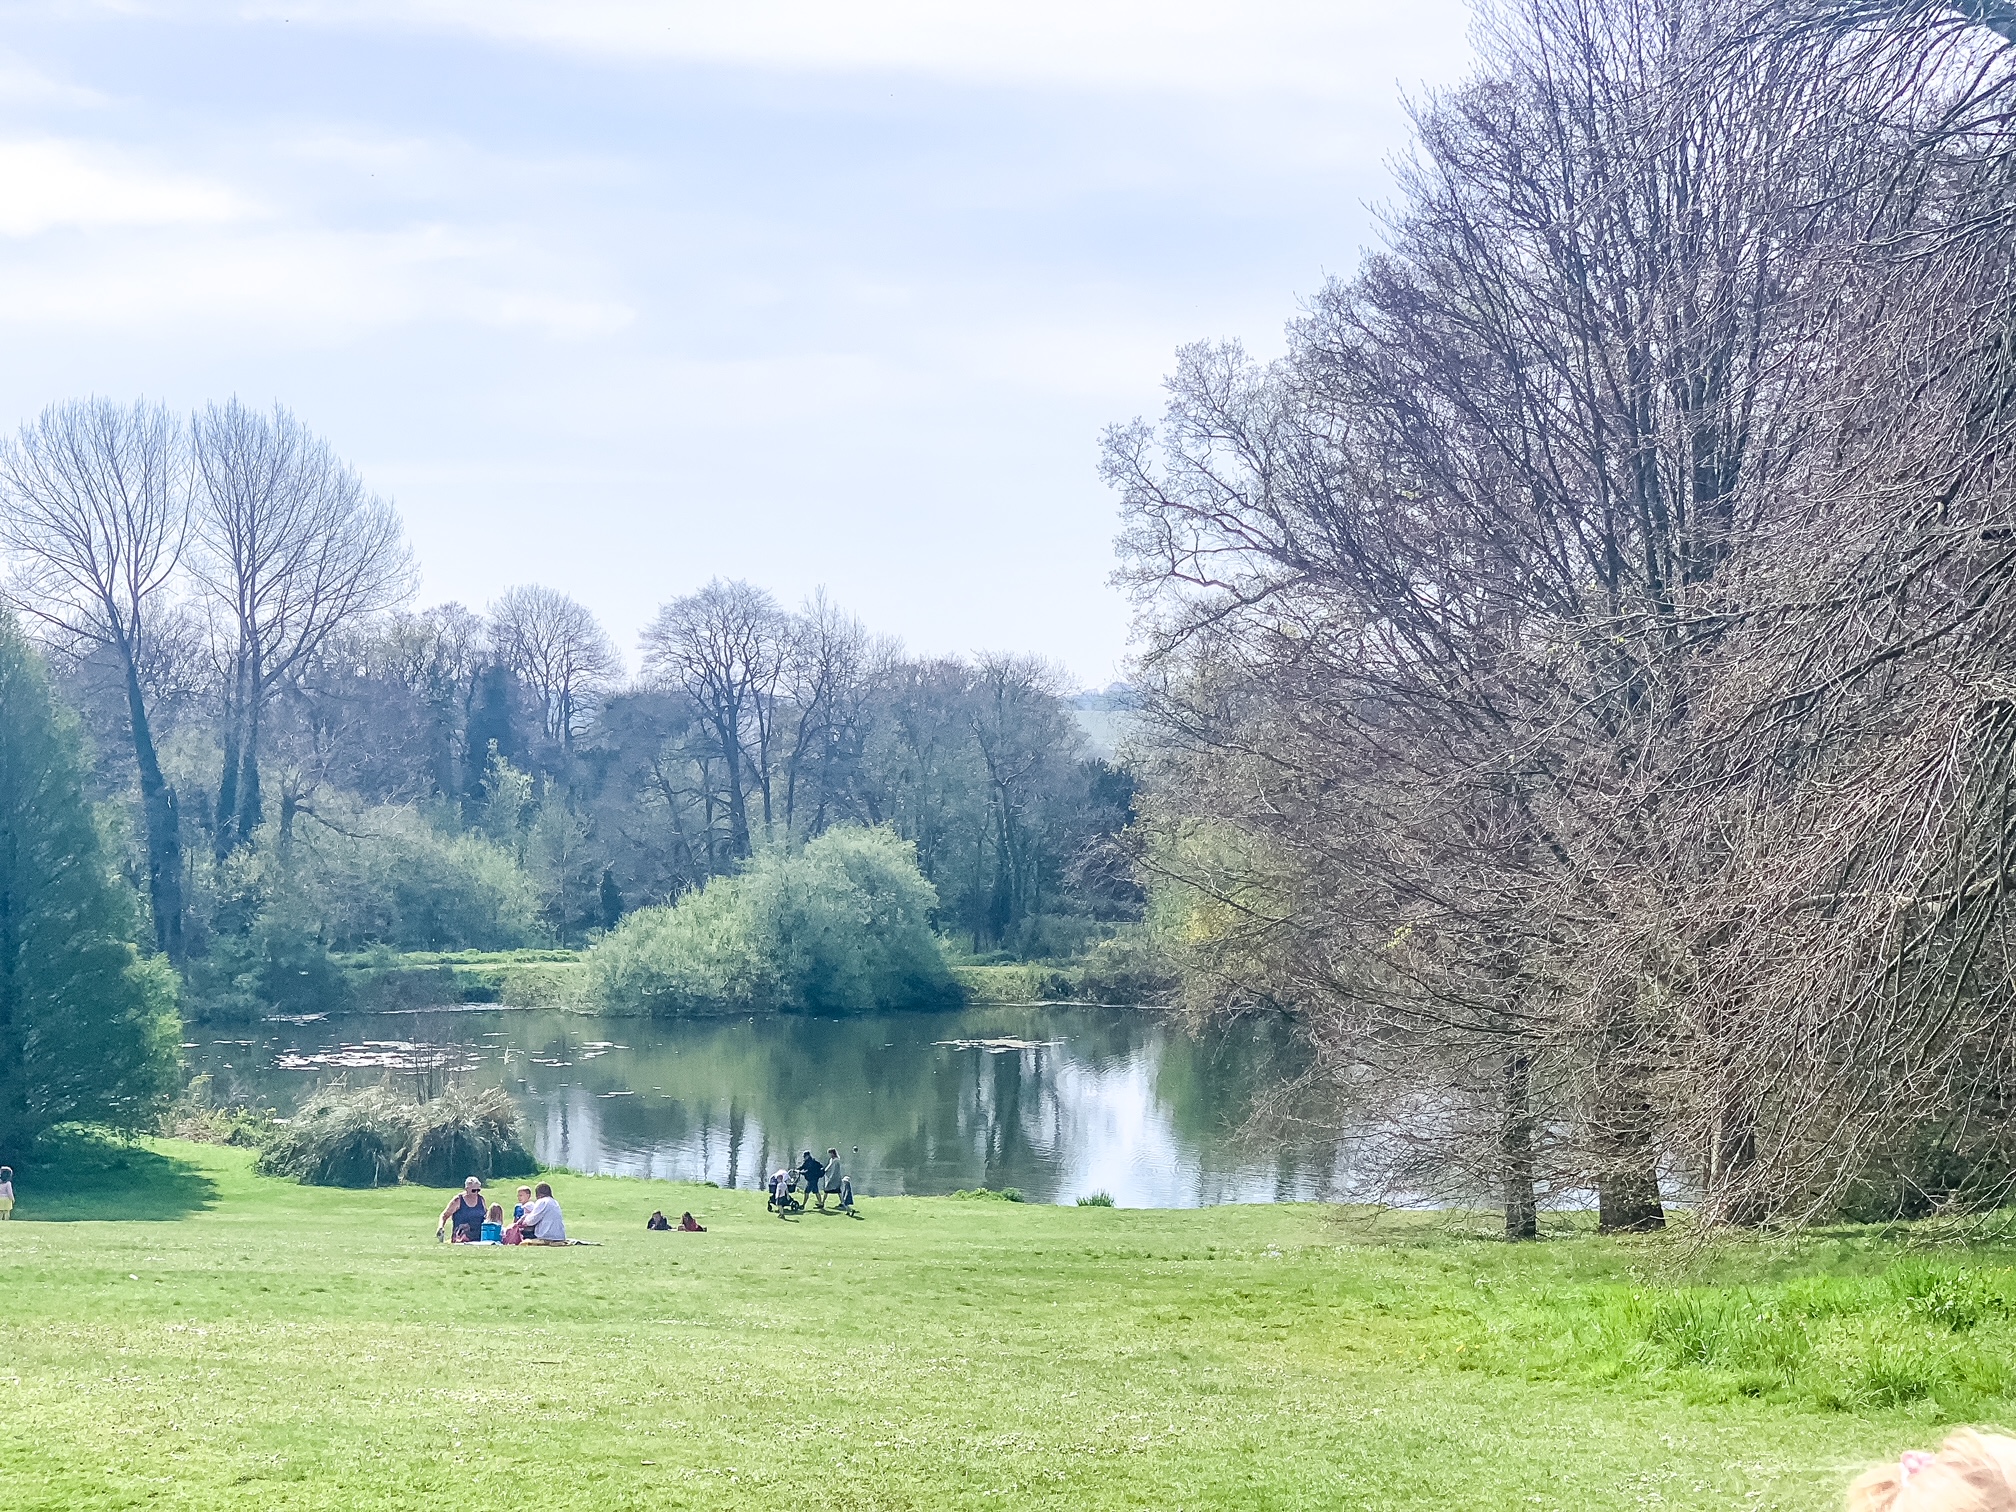 Kingston Maurward Animal Park and Gardens - field sloping down to the lake with people enjoying a picnic